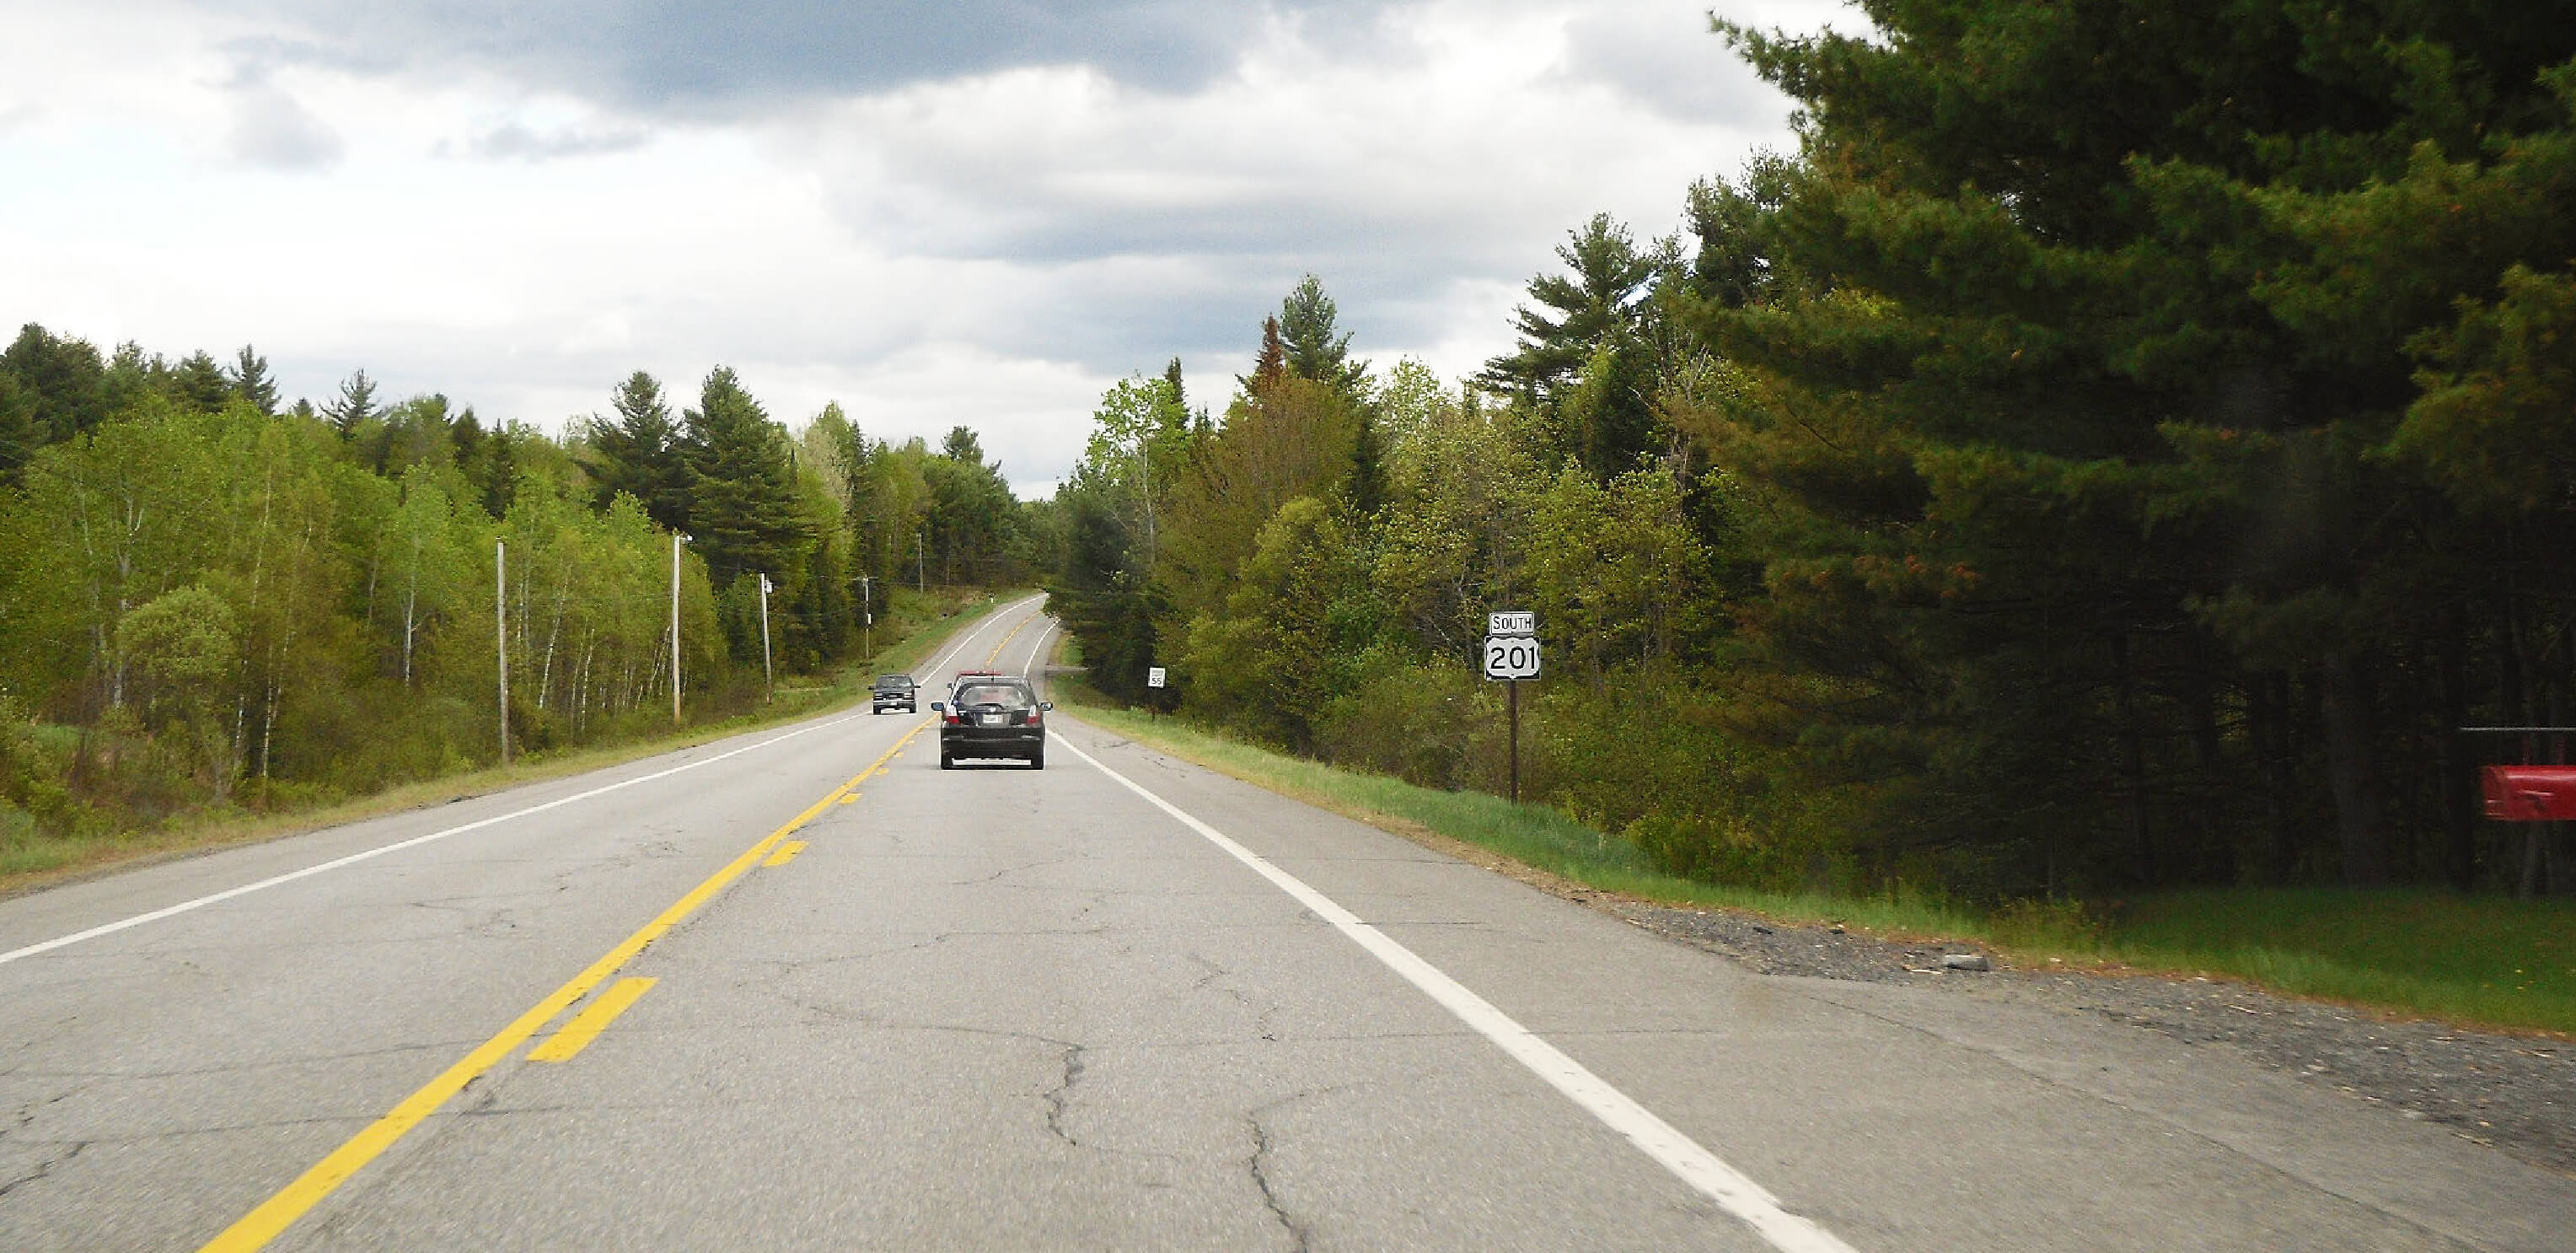 Photograph of US Route 201 in Maine